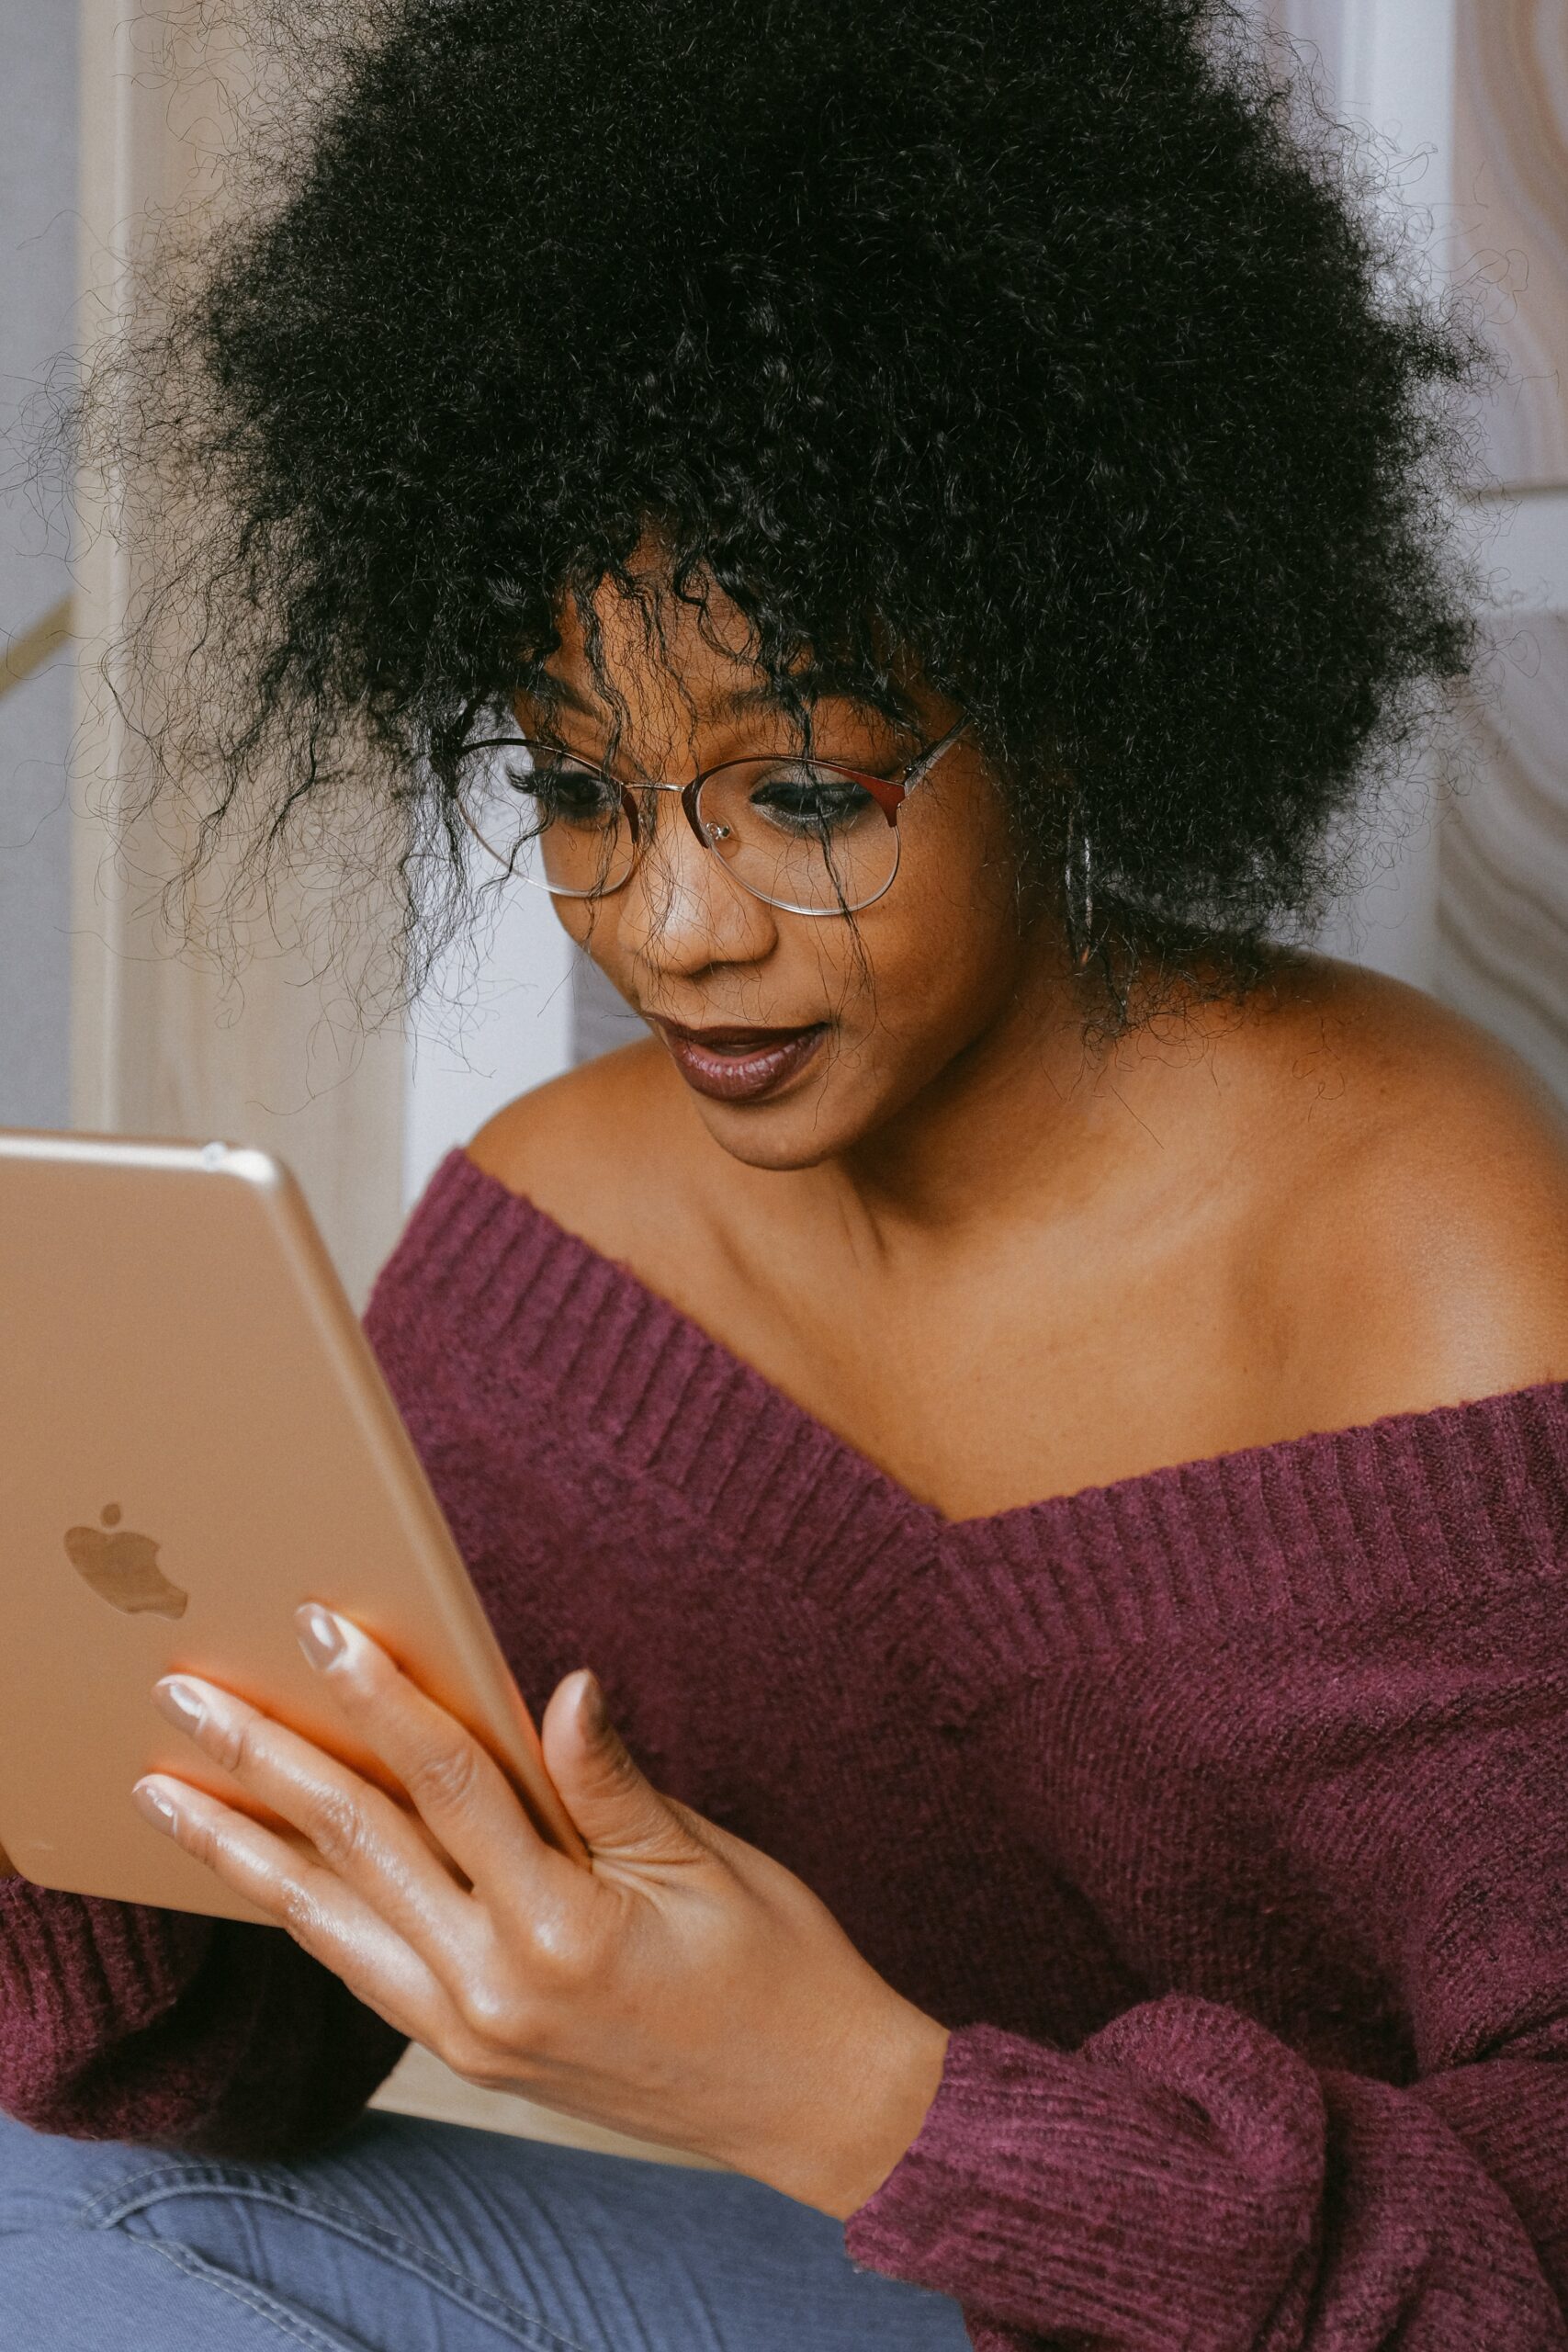 Woman wearing an off-the-shoulder purple sweater looking at an iPad